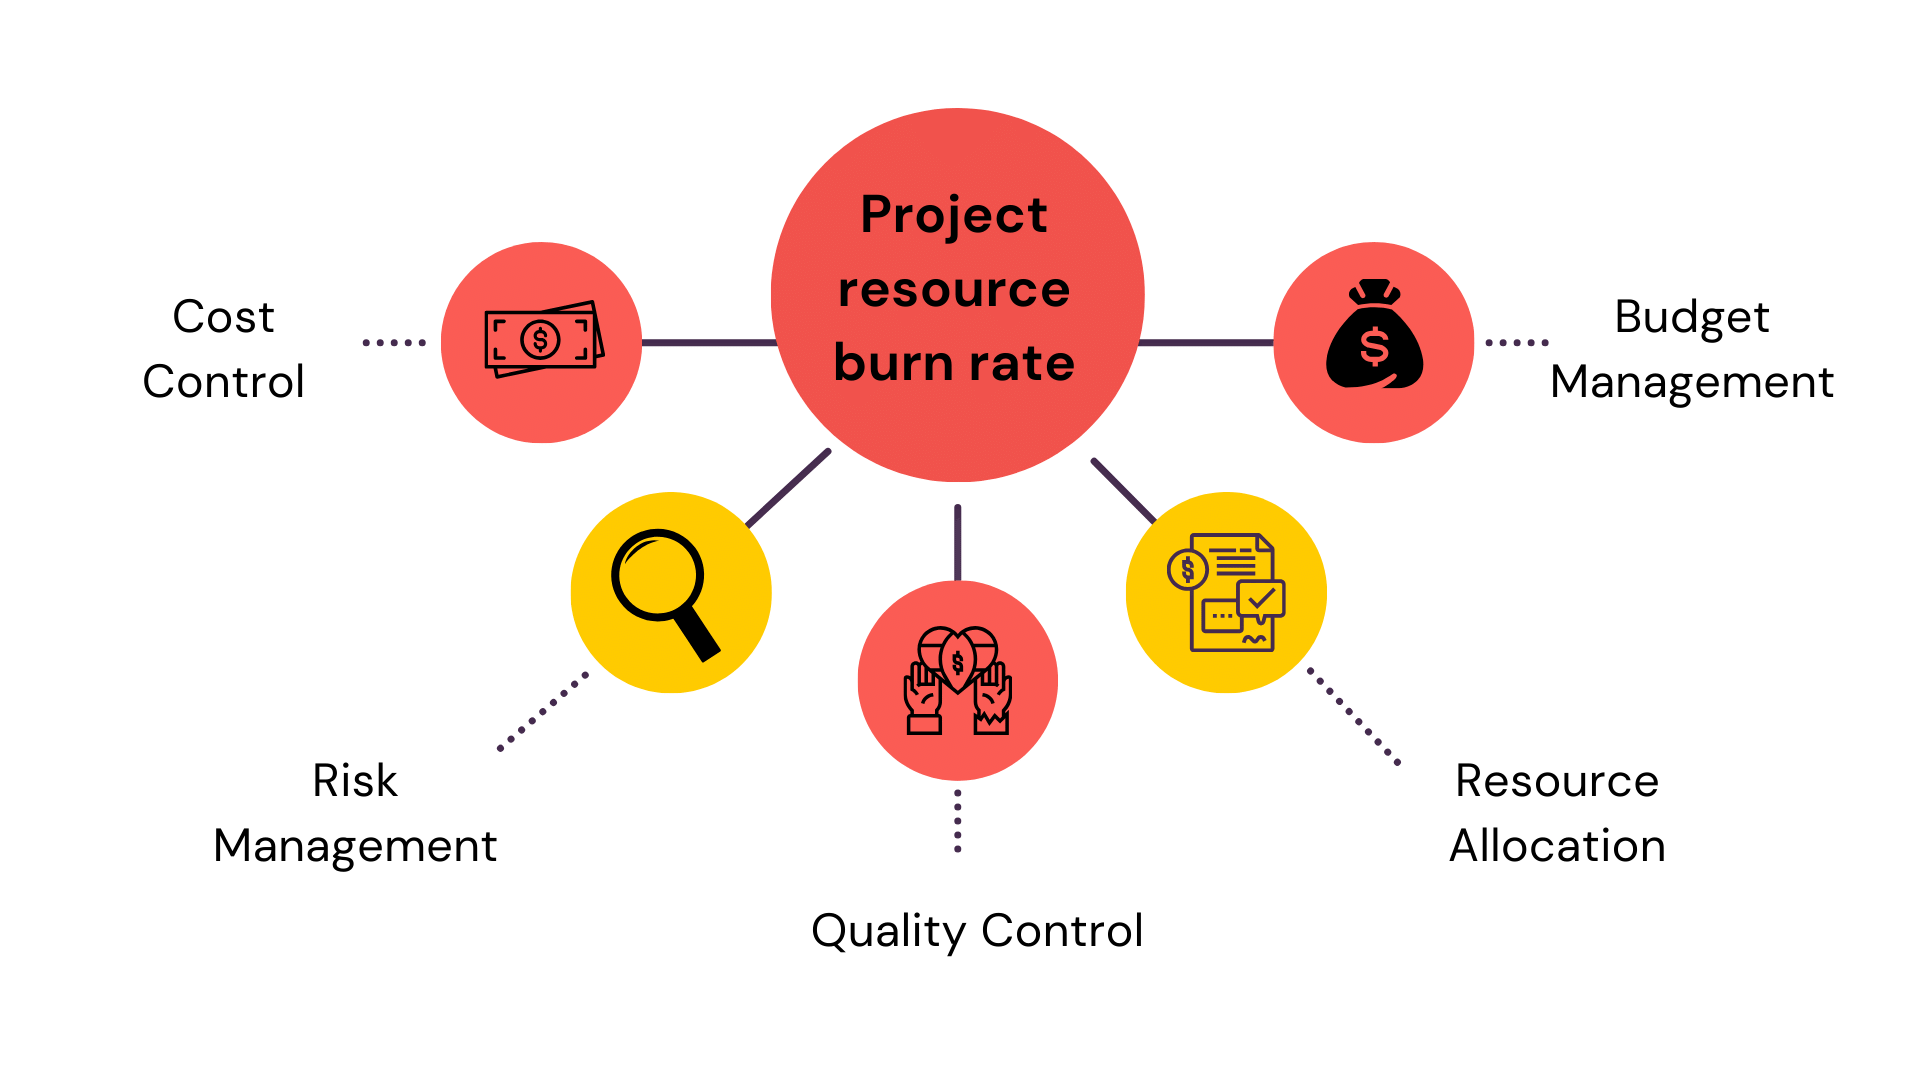 Project resource burn rate